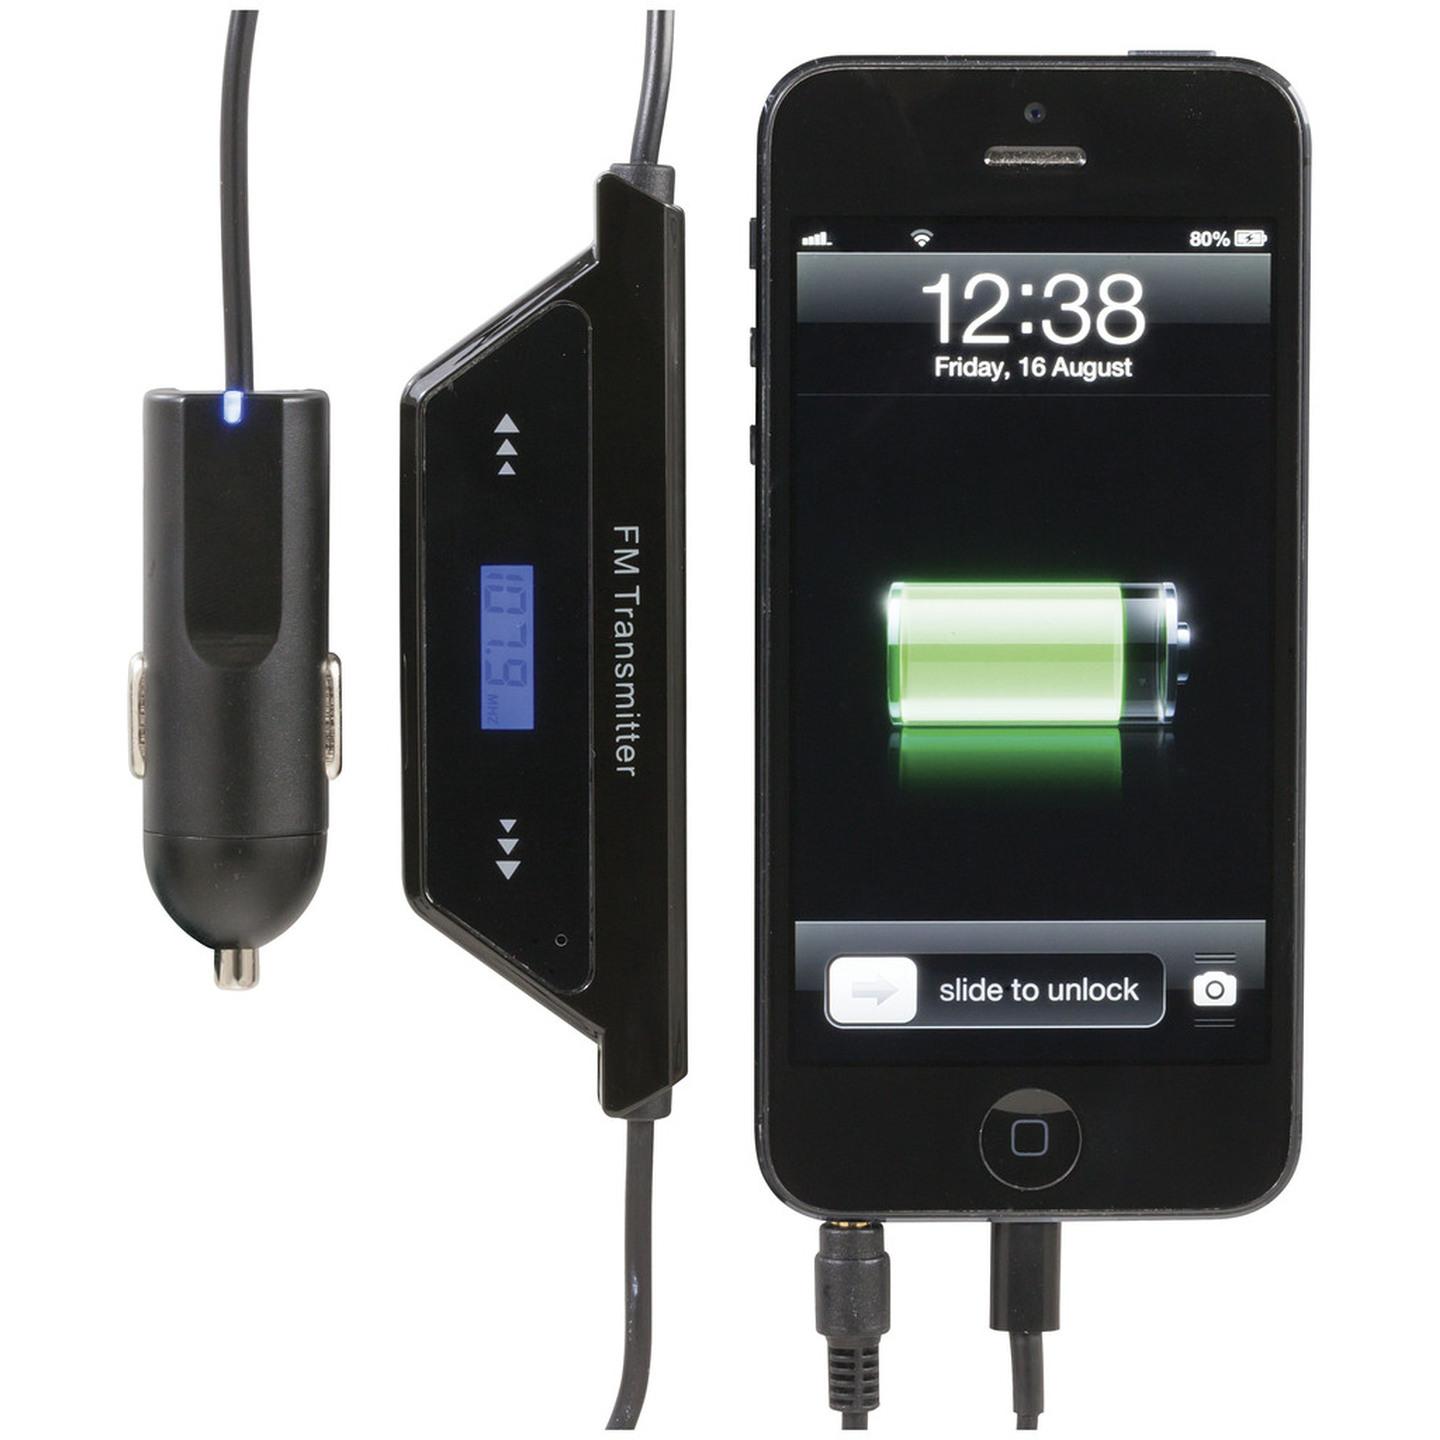 In-Car FM Transmitter and Charger to suit iPhone 5